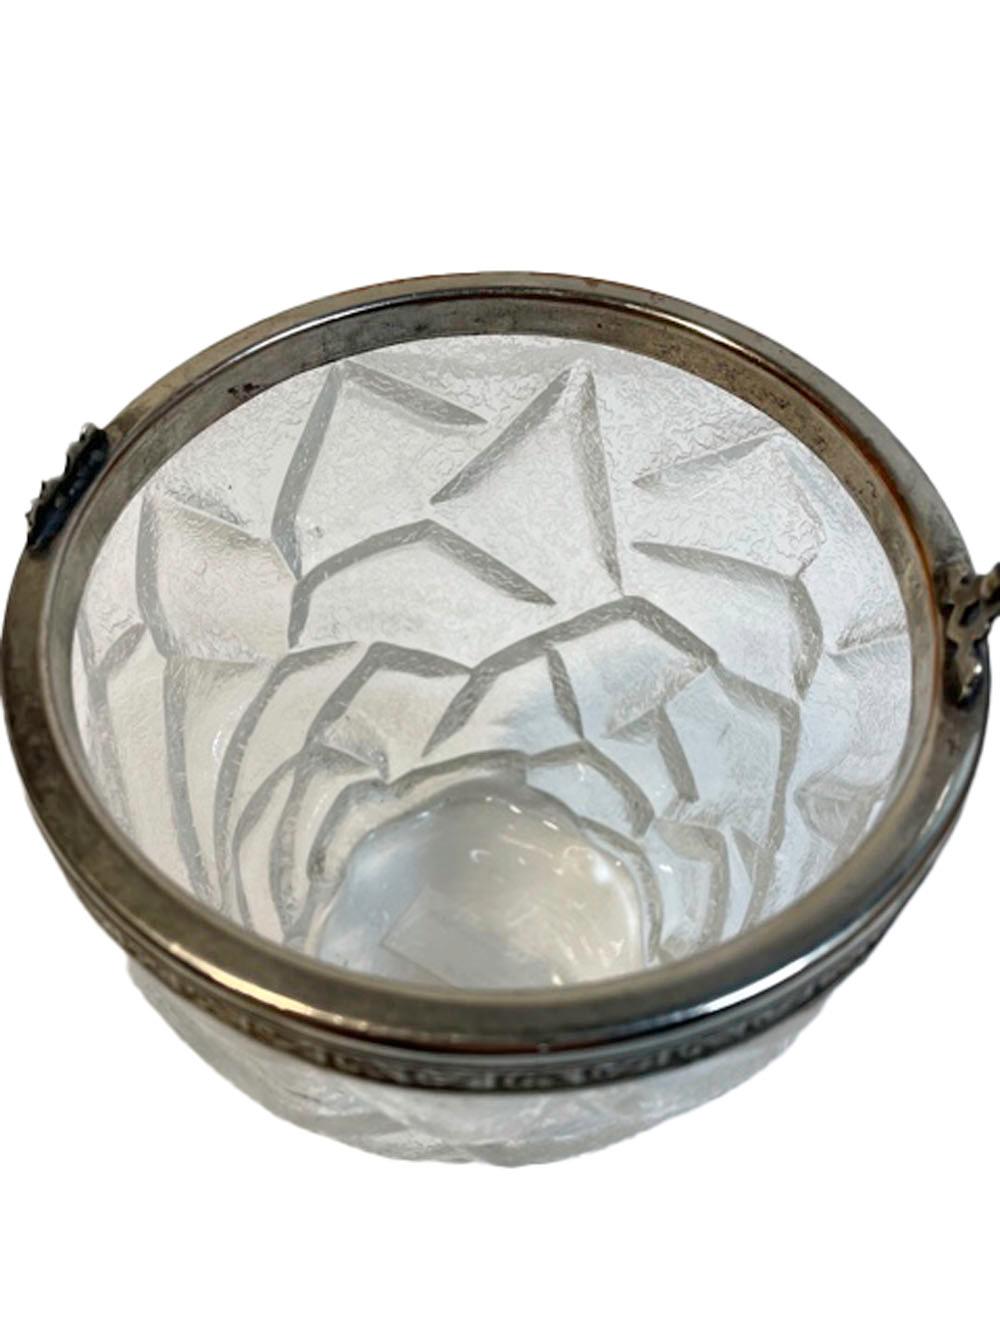 Vintage molded glass ice bucket of pail form with a frosted surface molded to resemble cracked ice. The silver plate rim with leaf molded side and attached swing handle.